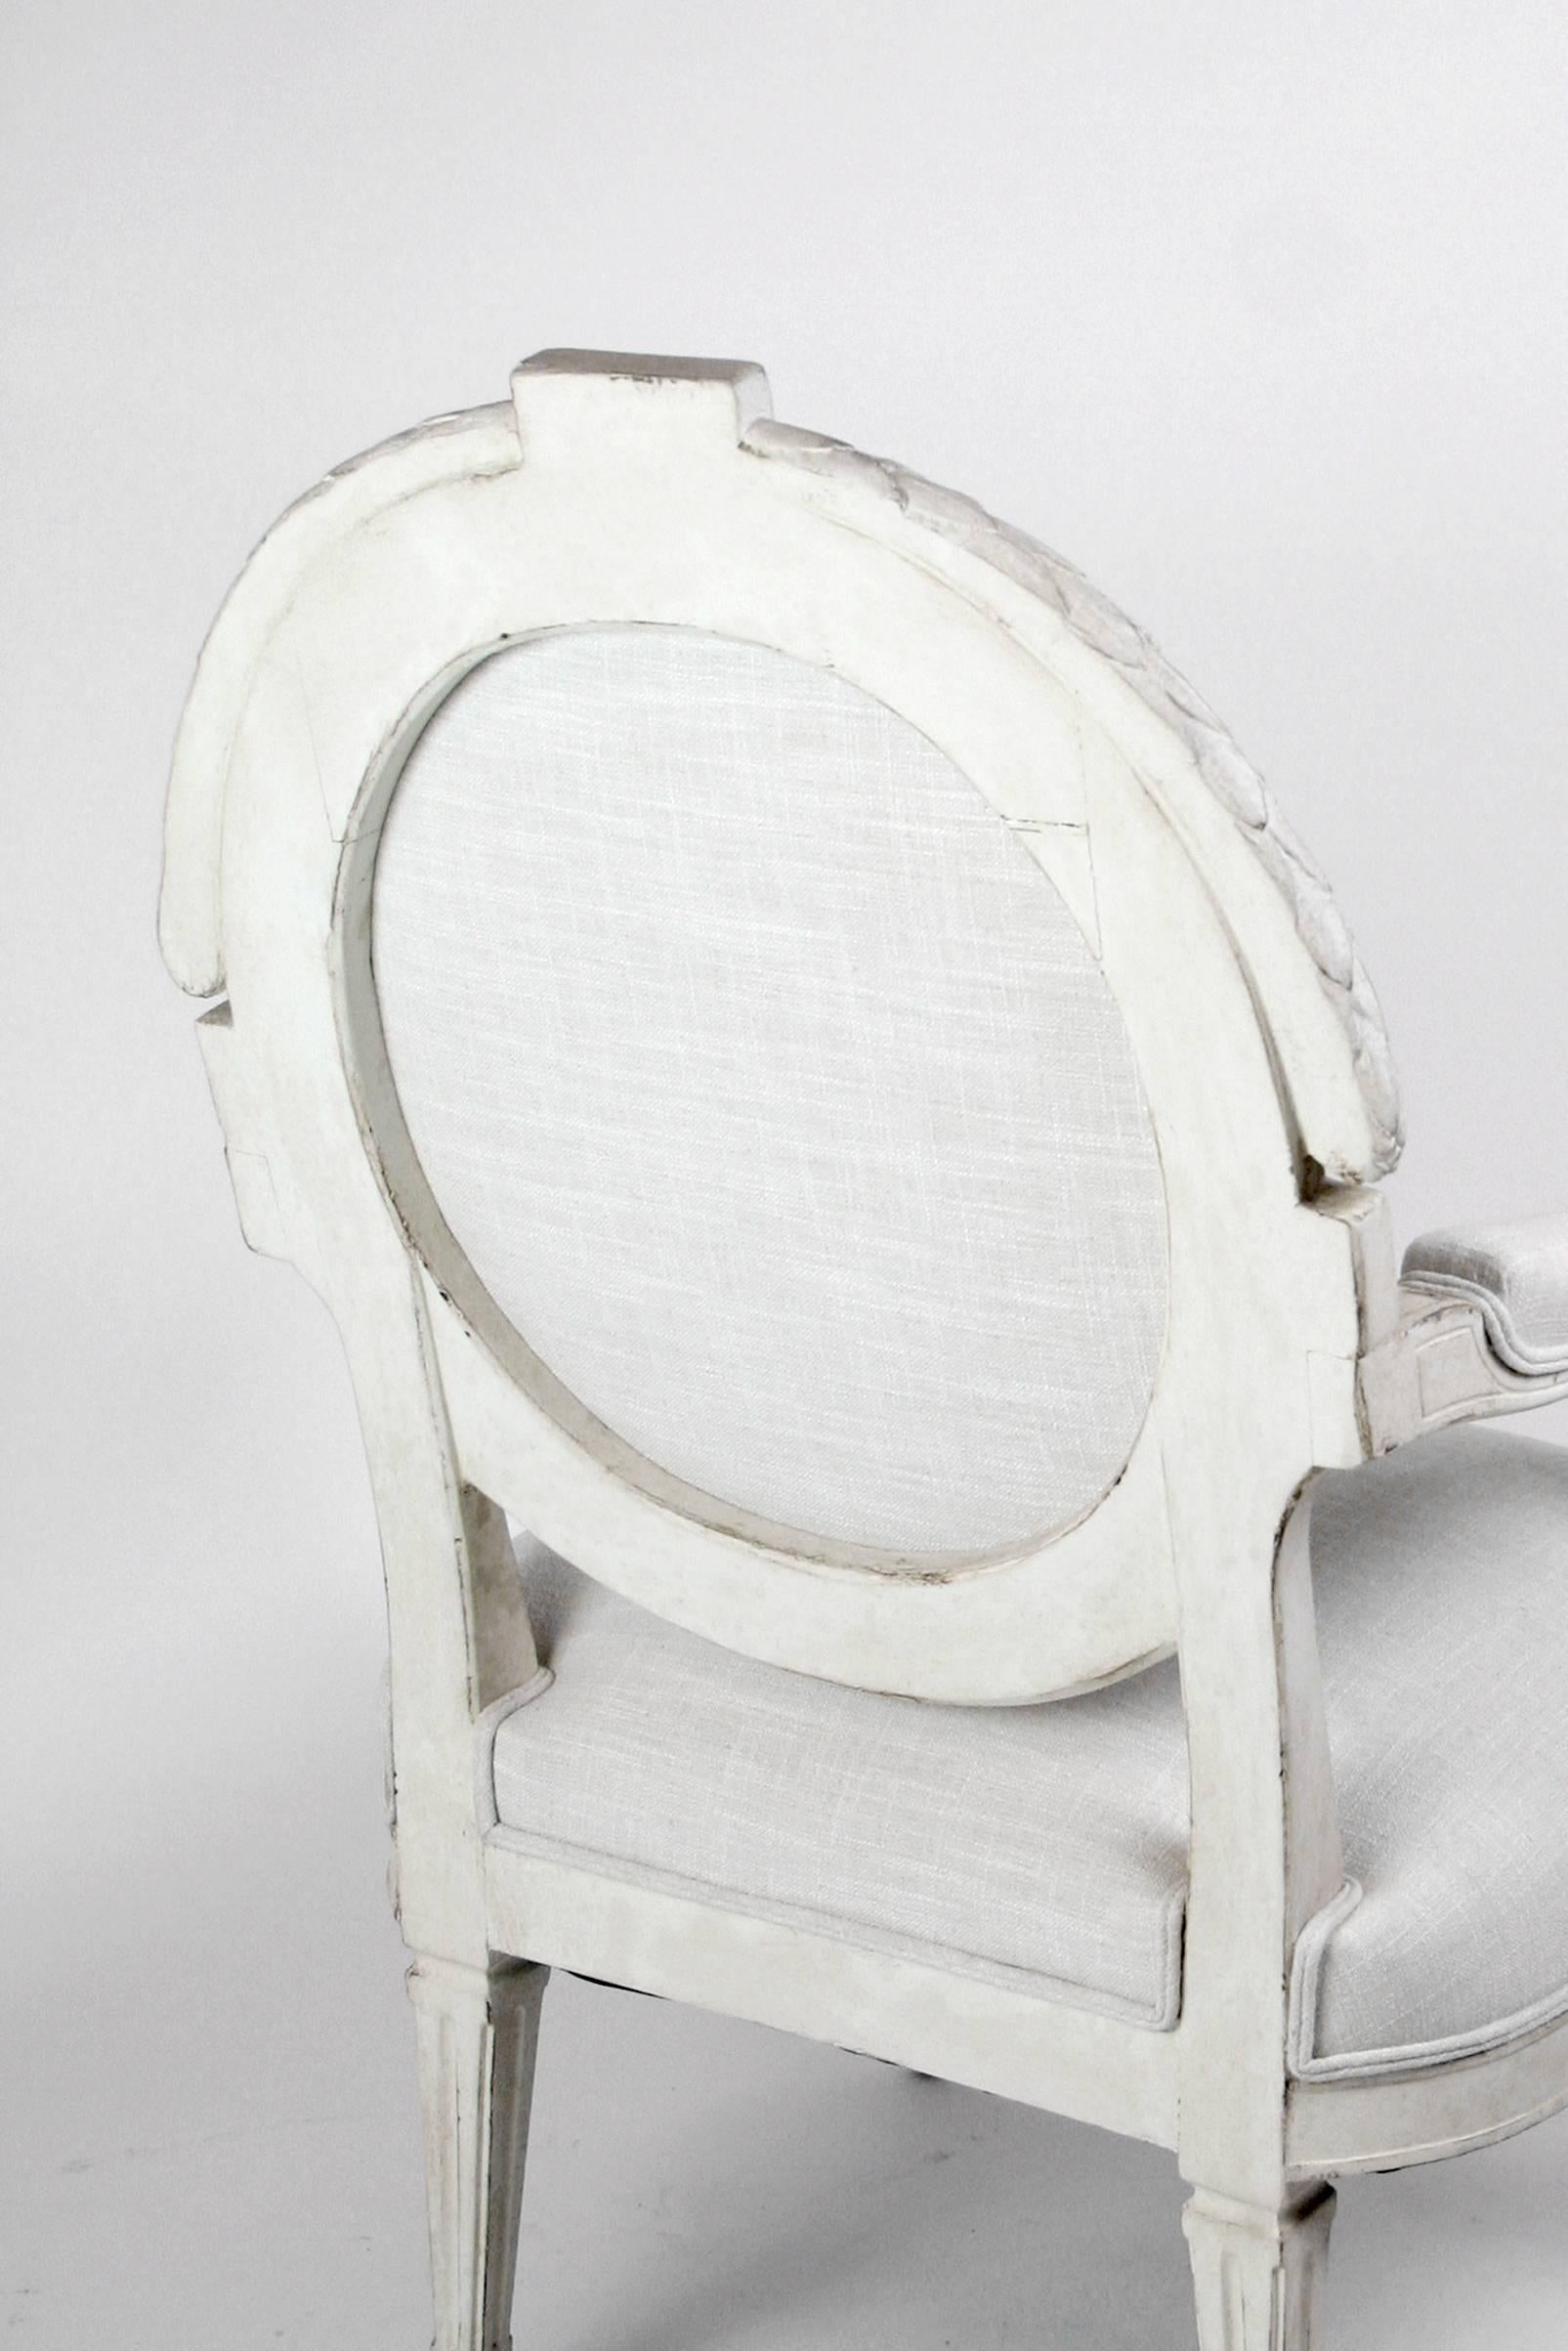 A large and imposing late 1800s, early 1900s French Louis XVI-style armchair with carved wood frame painted in a distressed off-white color. The oval seat back features a carved twisted ribbon surmounted by garland decorations. The legs features